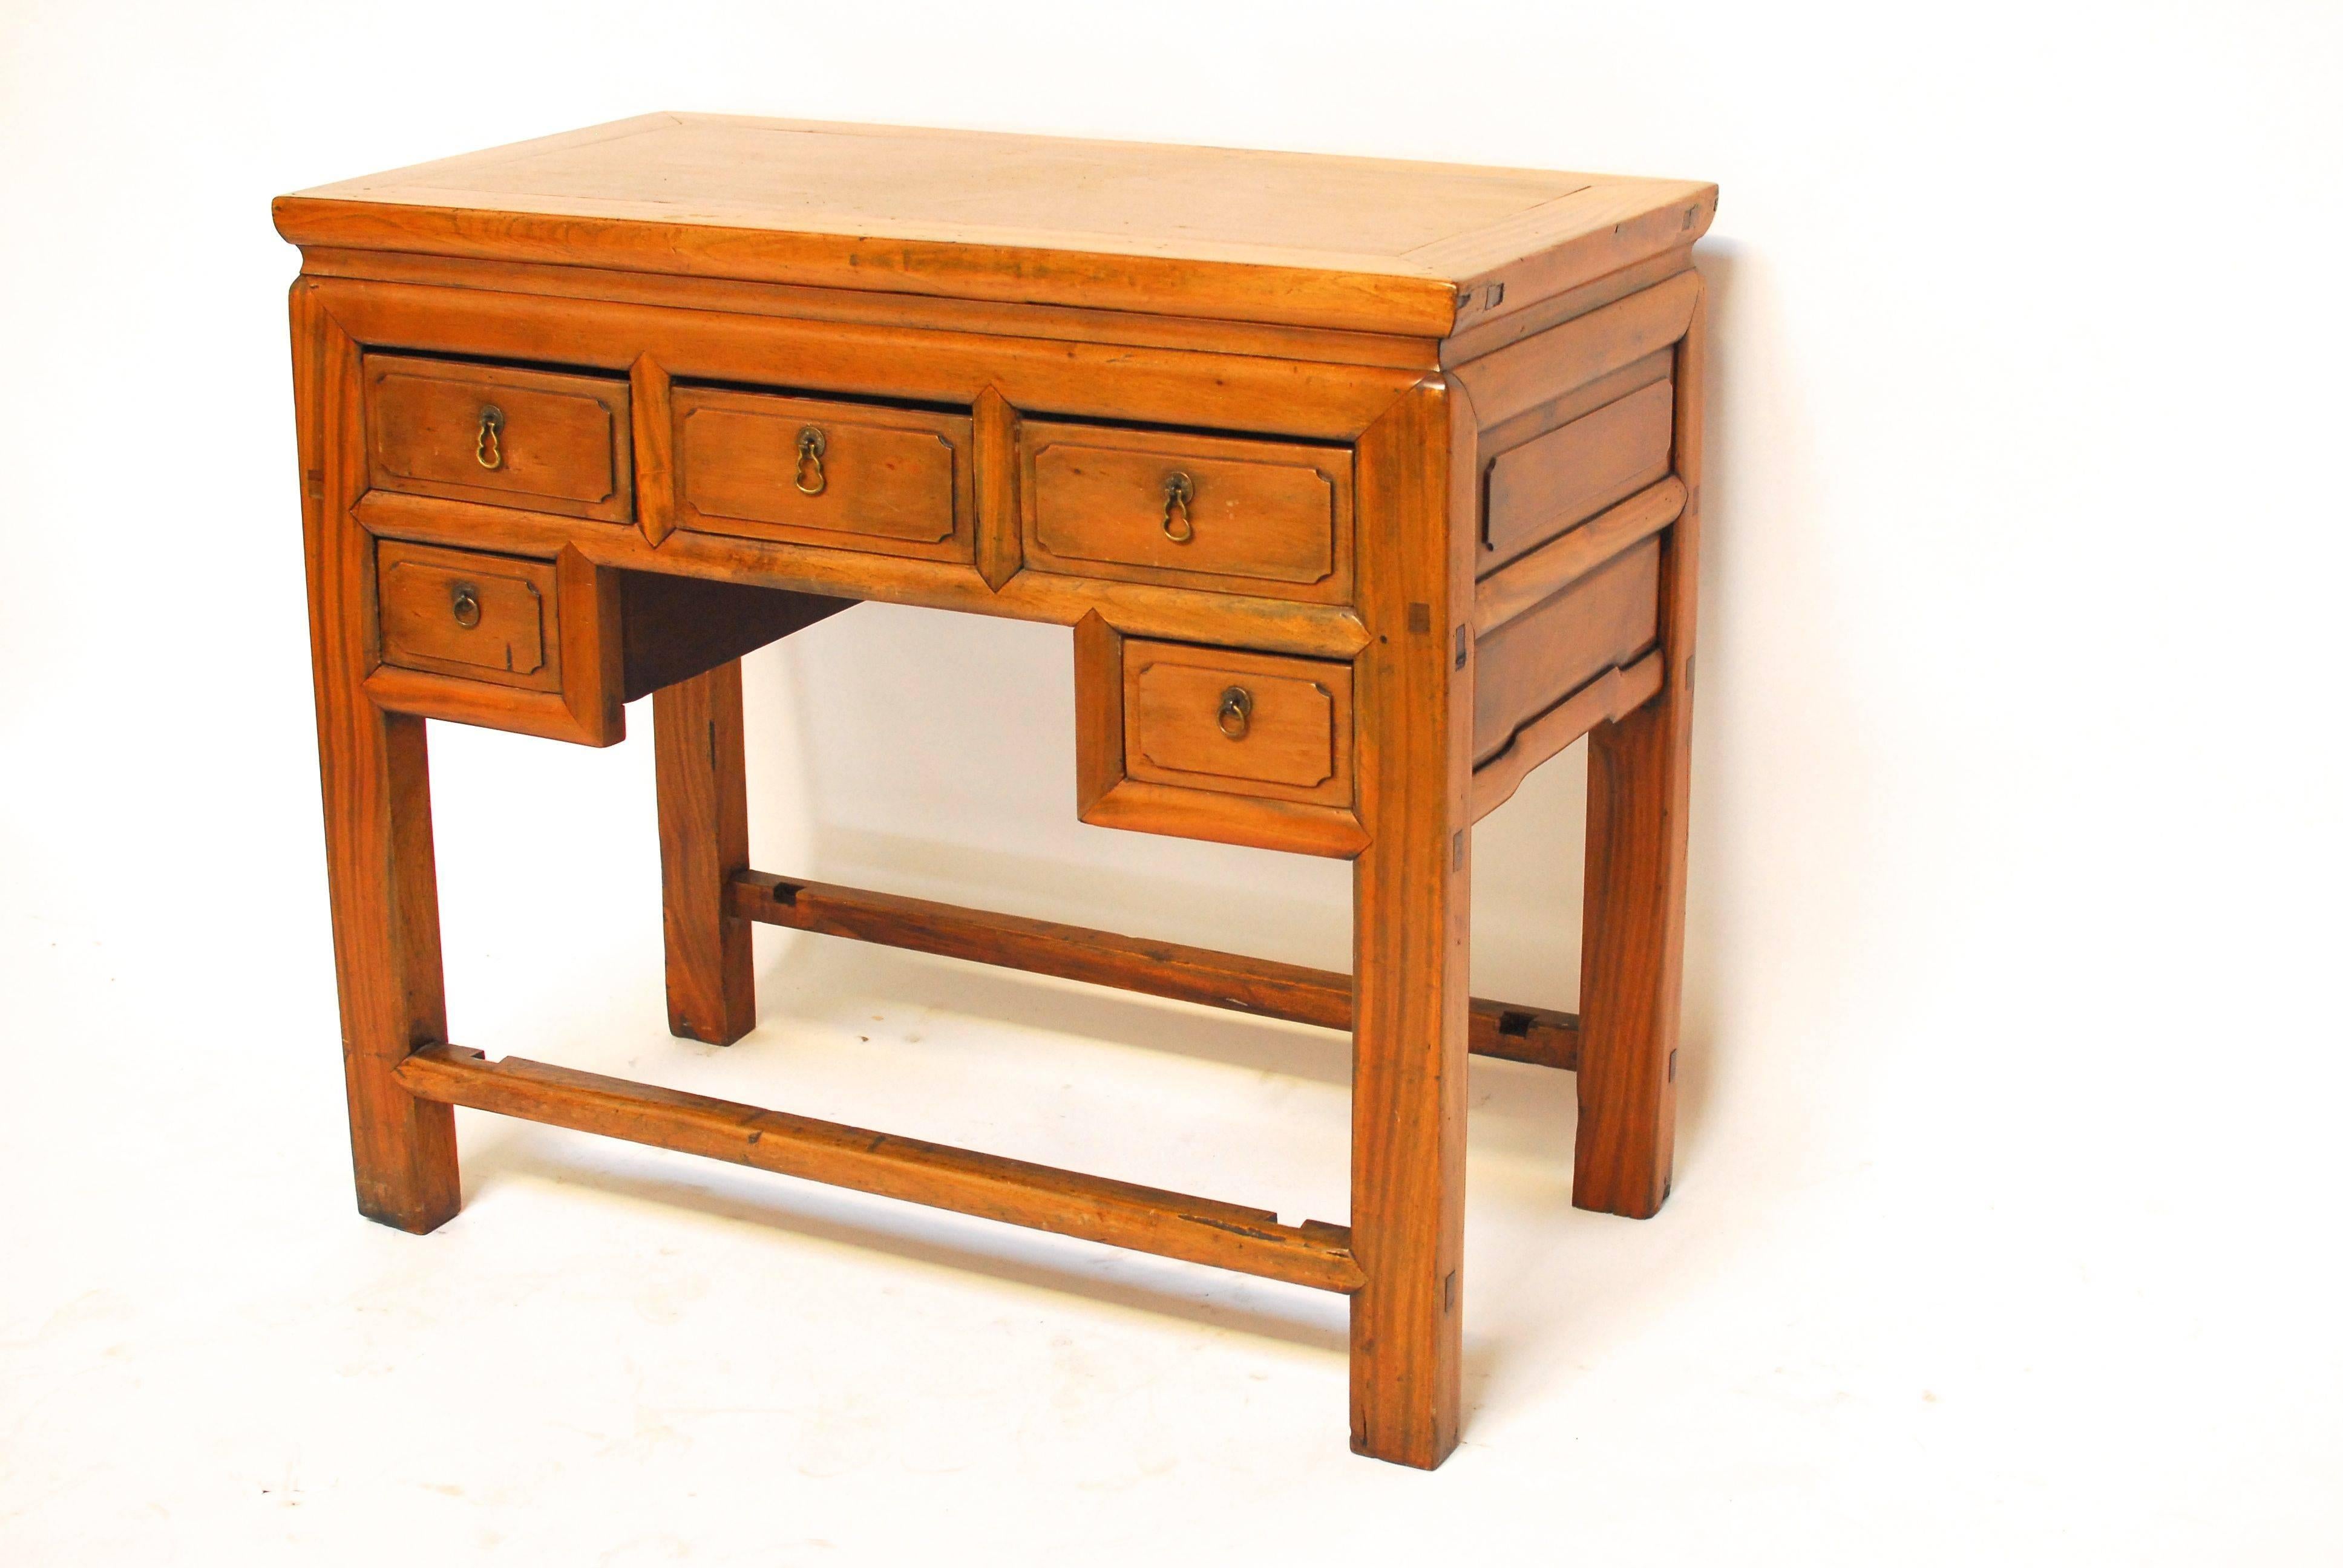 Antique Chinese five-drawer hardwood desk with rectangular paneled top on straight square legs. Stretchered footrest on front and back with detailed carving on back side also. Entire desk made with mortise and tenon joints. Good condition given age